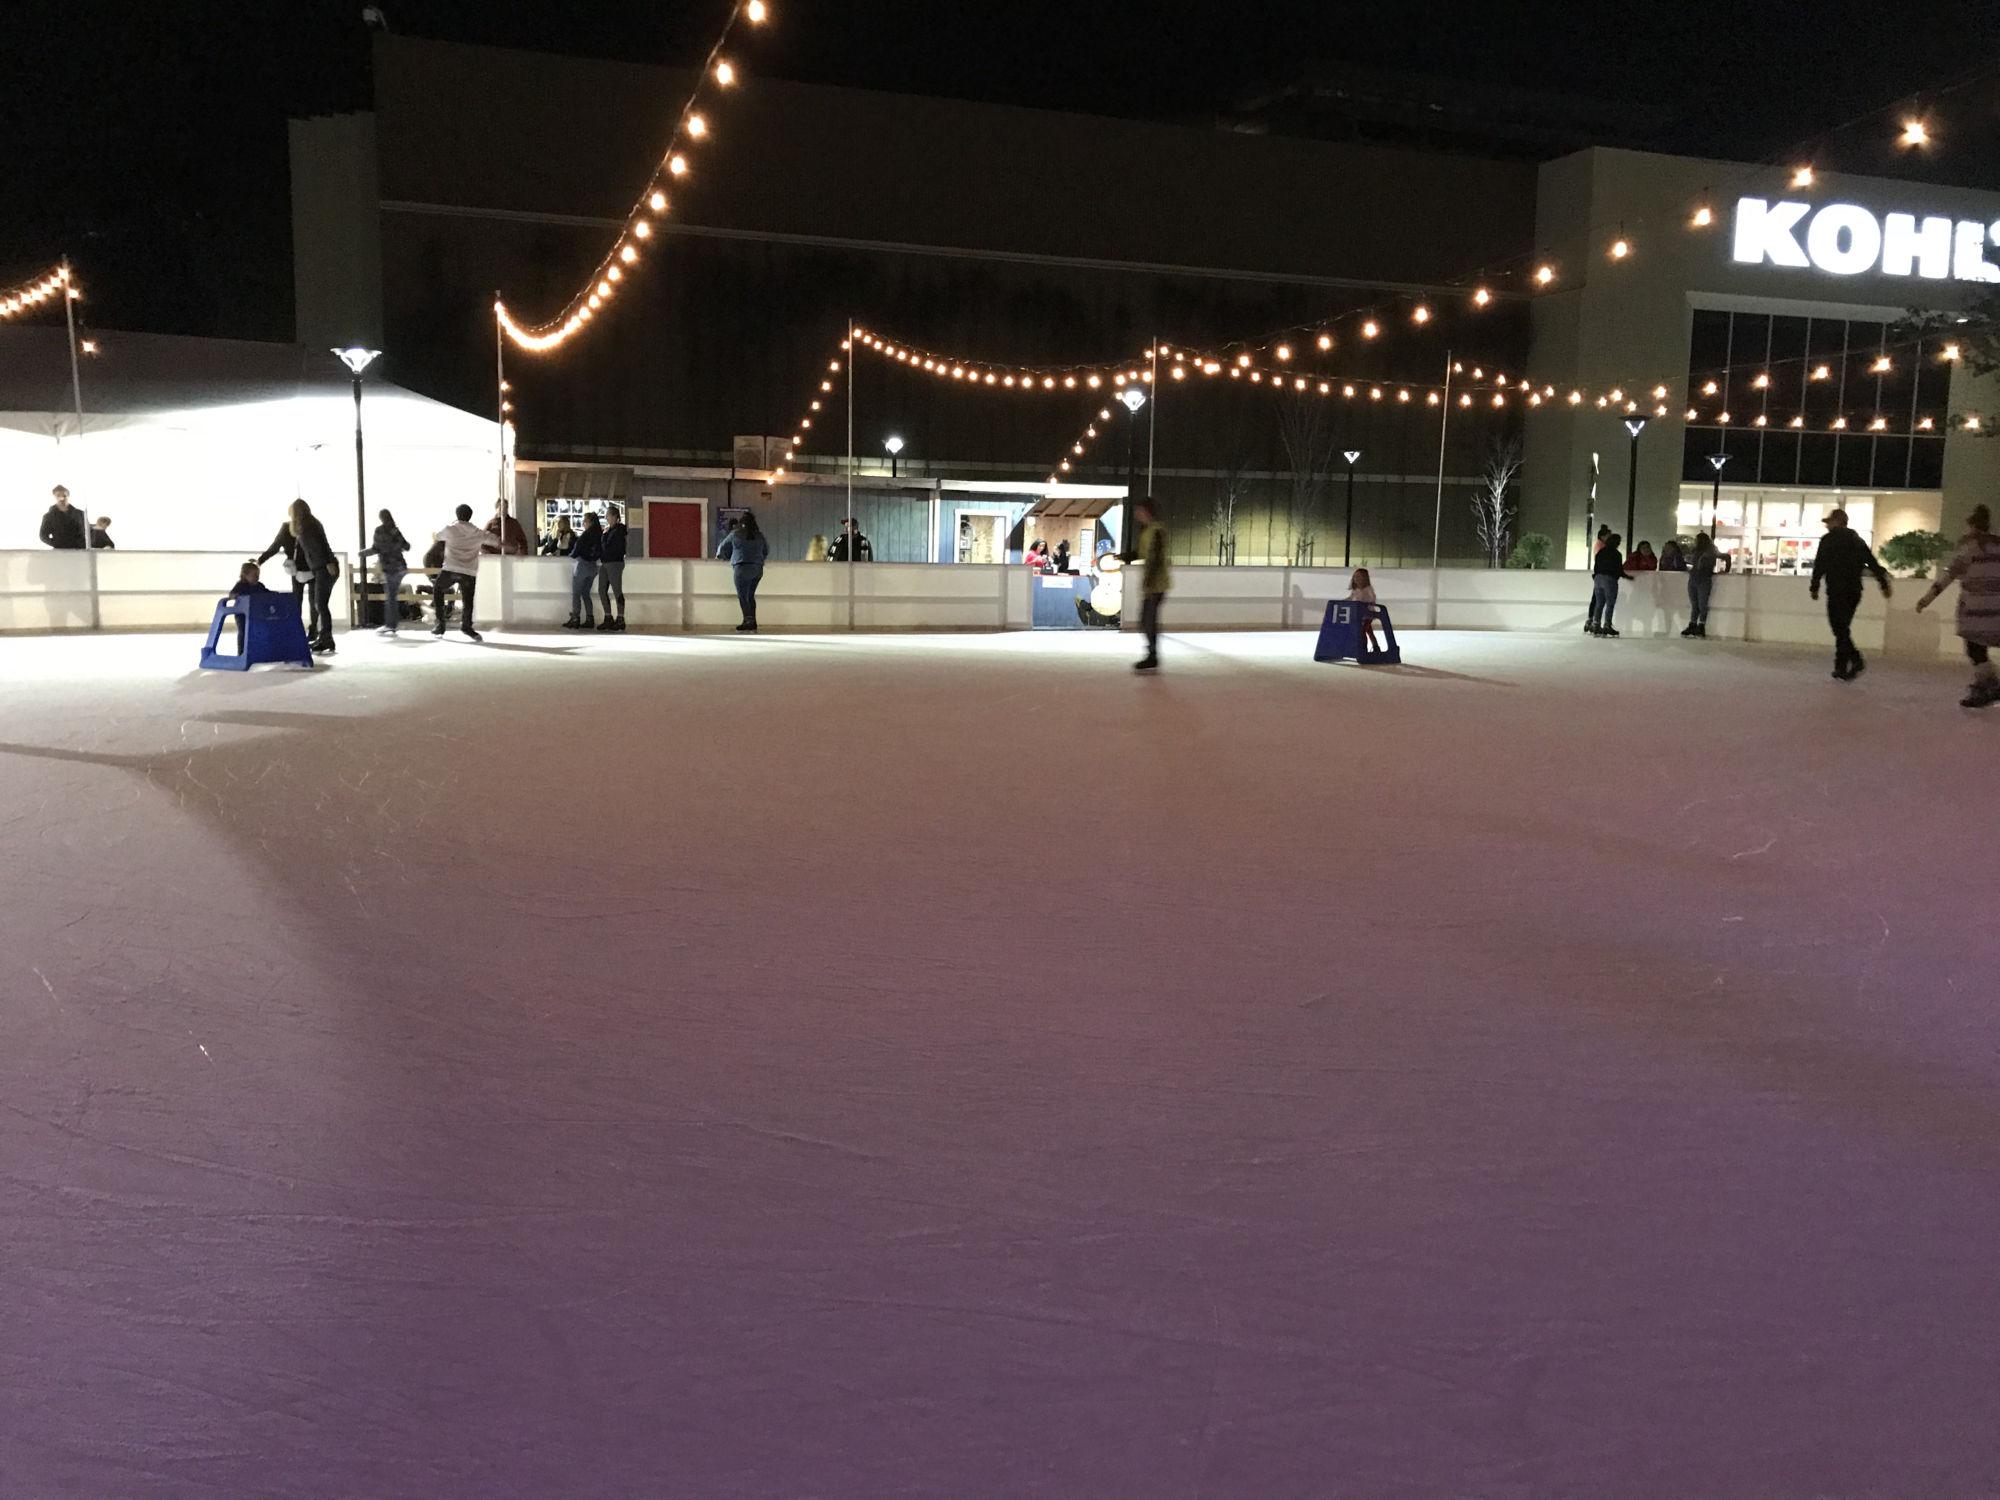 The nearly empty rink provided lots of room for skaters. 